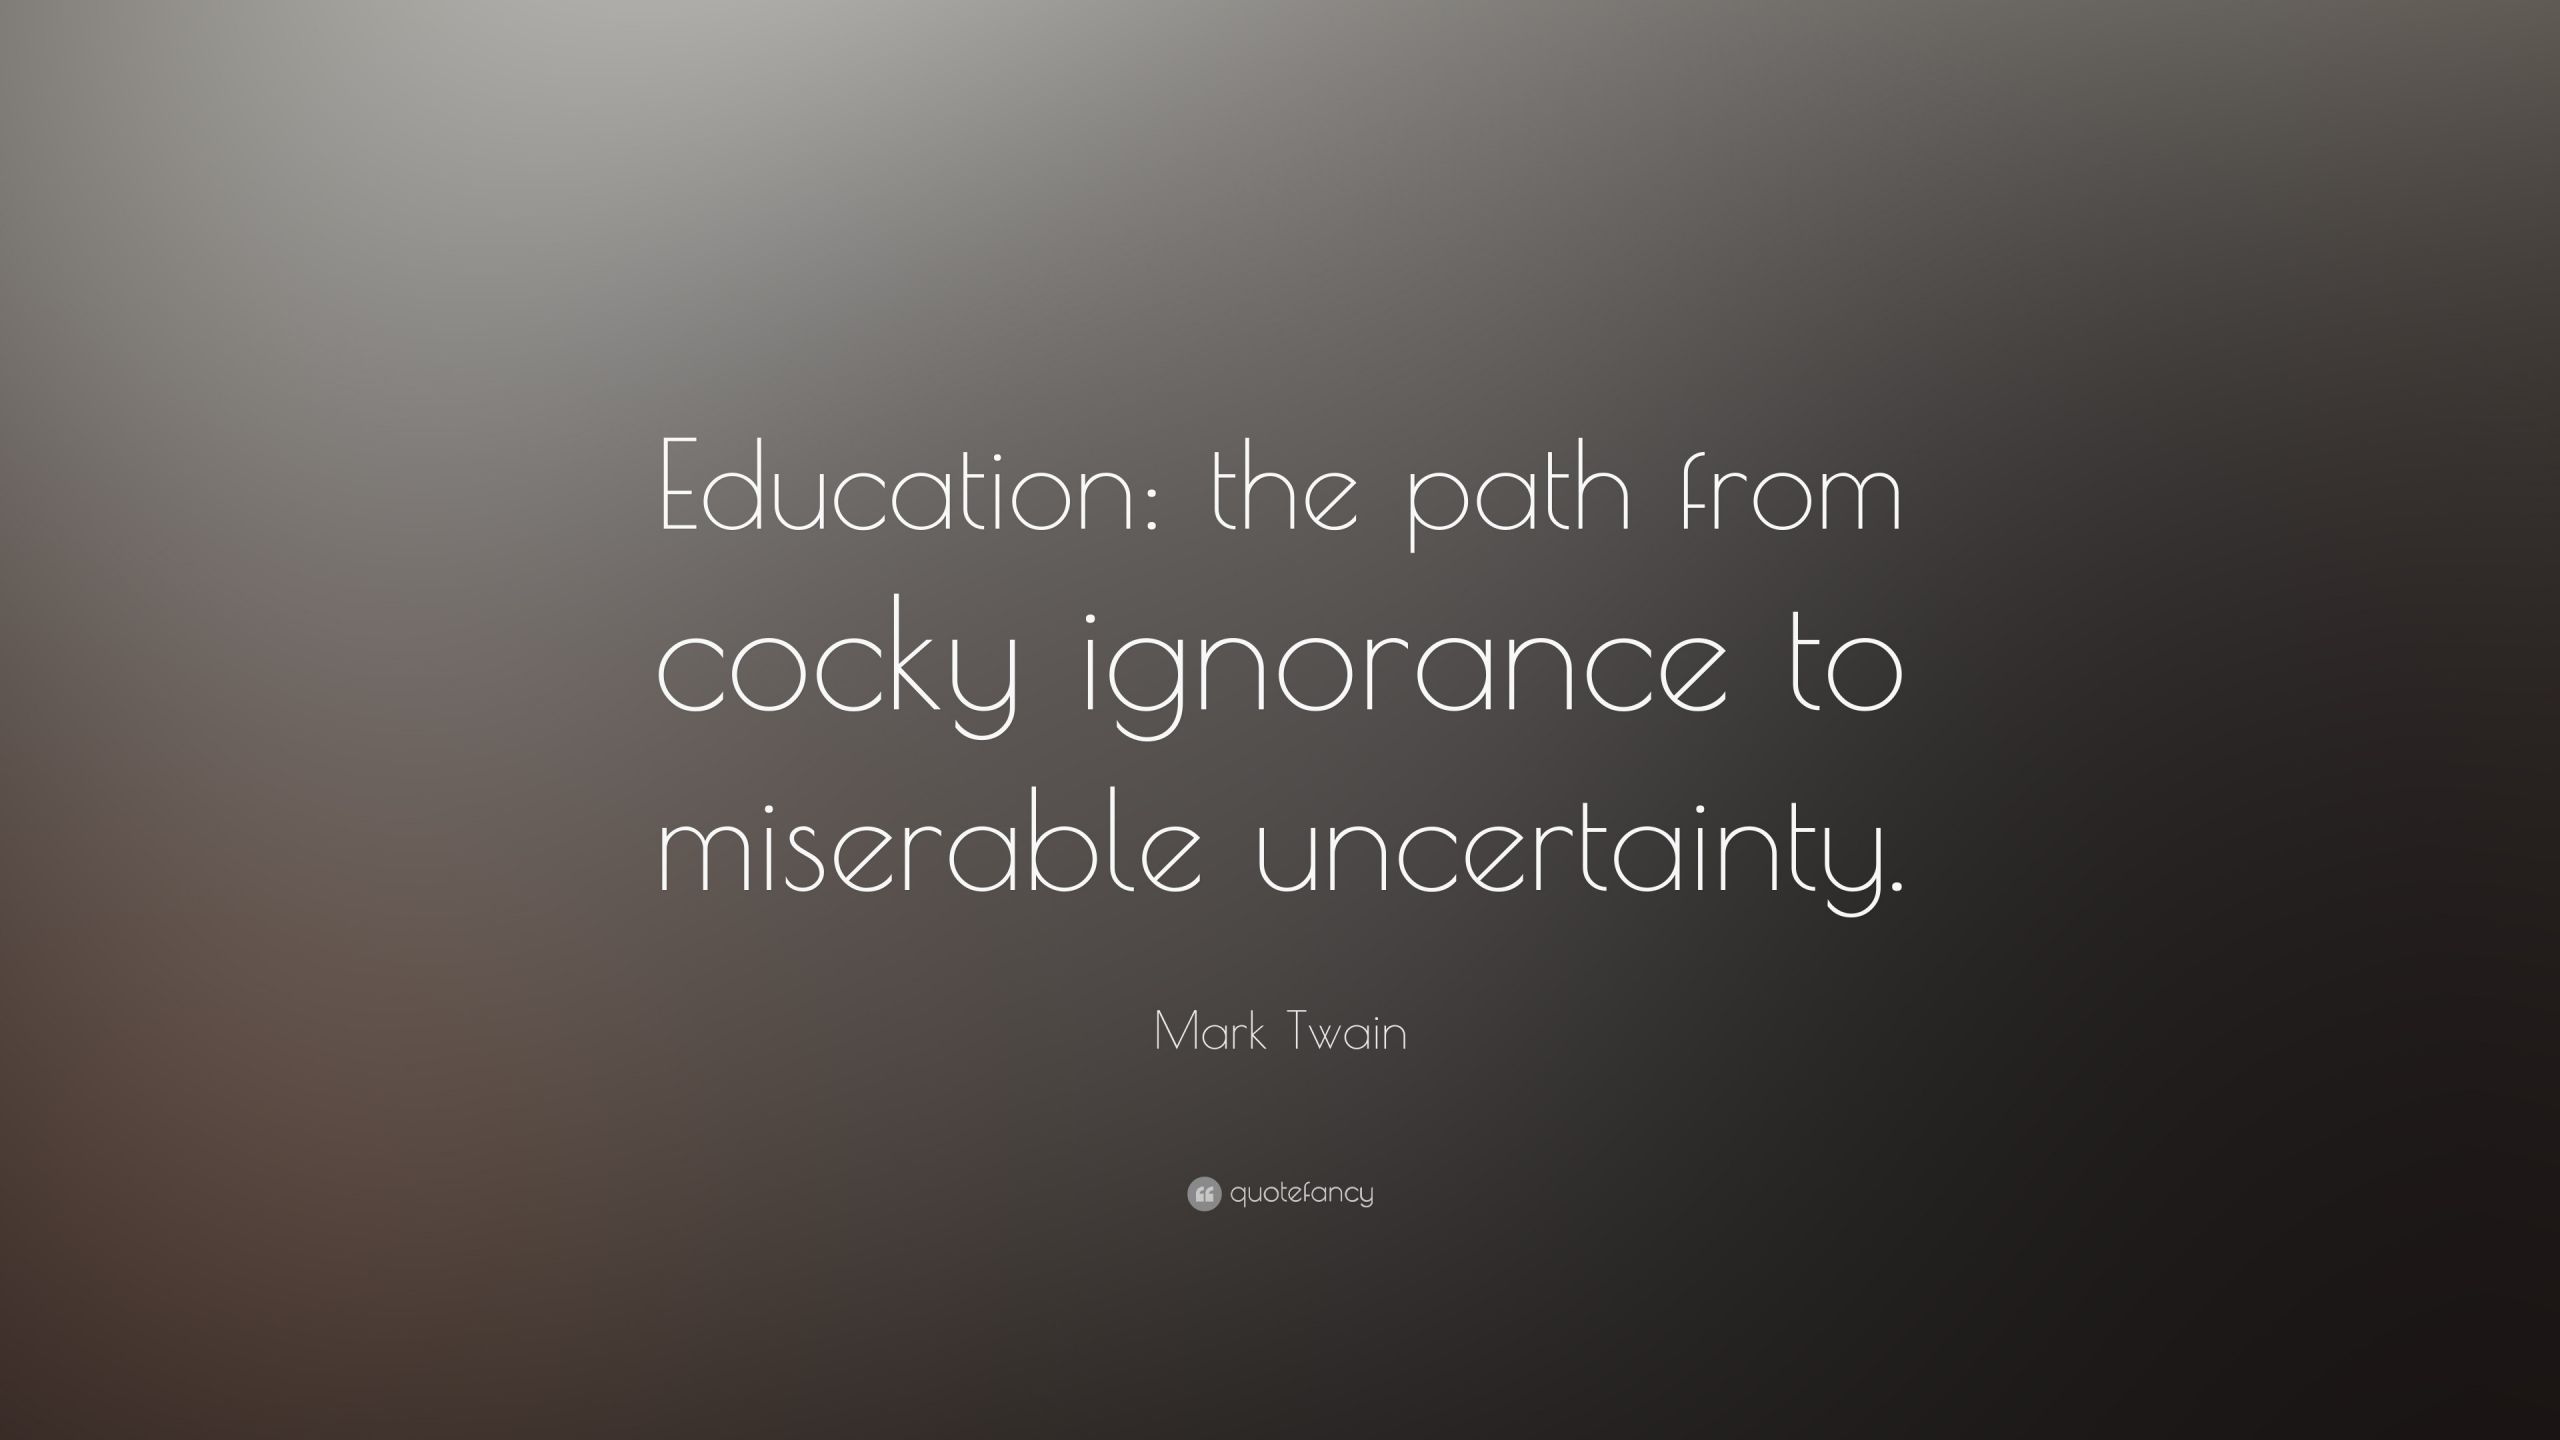 Mark Twain Quotes Education
 Mark Twain Quote “Education the path from cocky